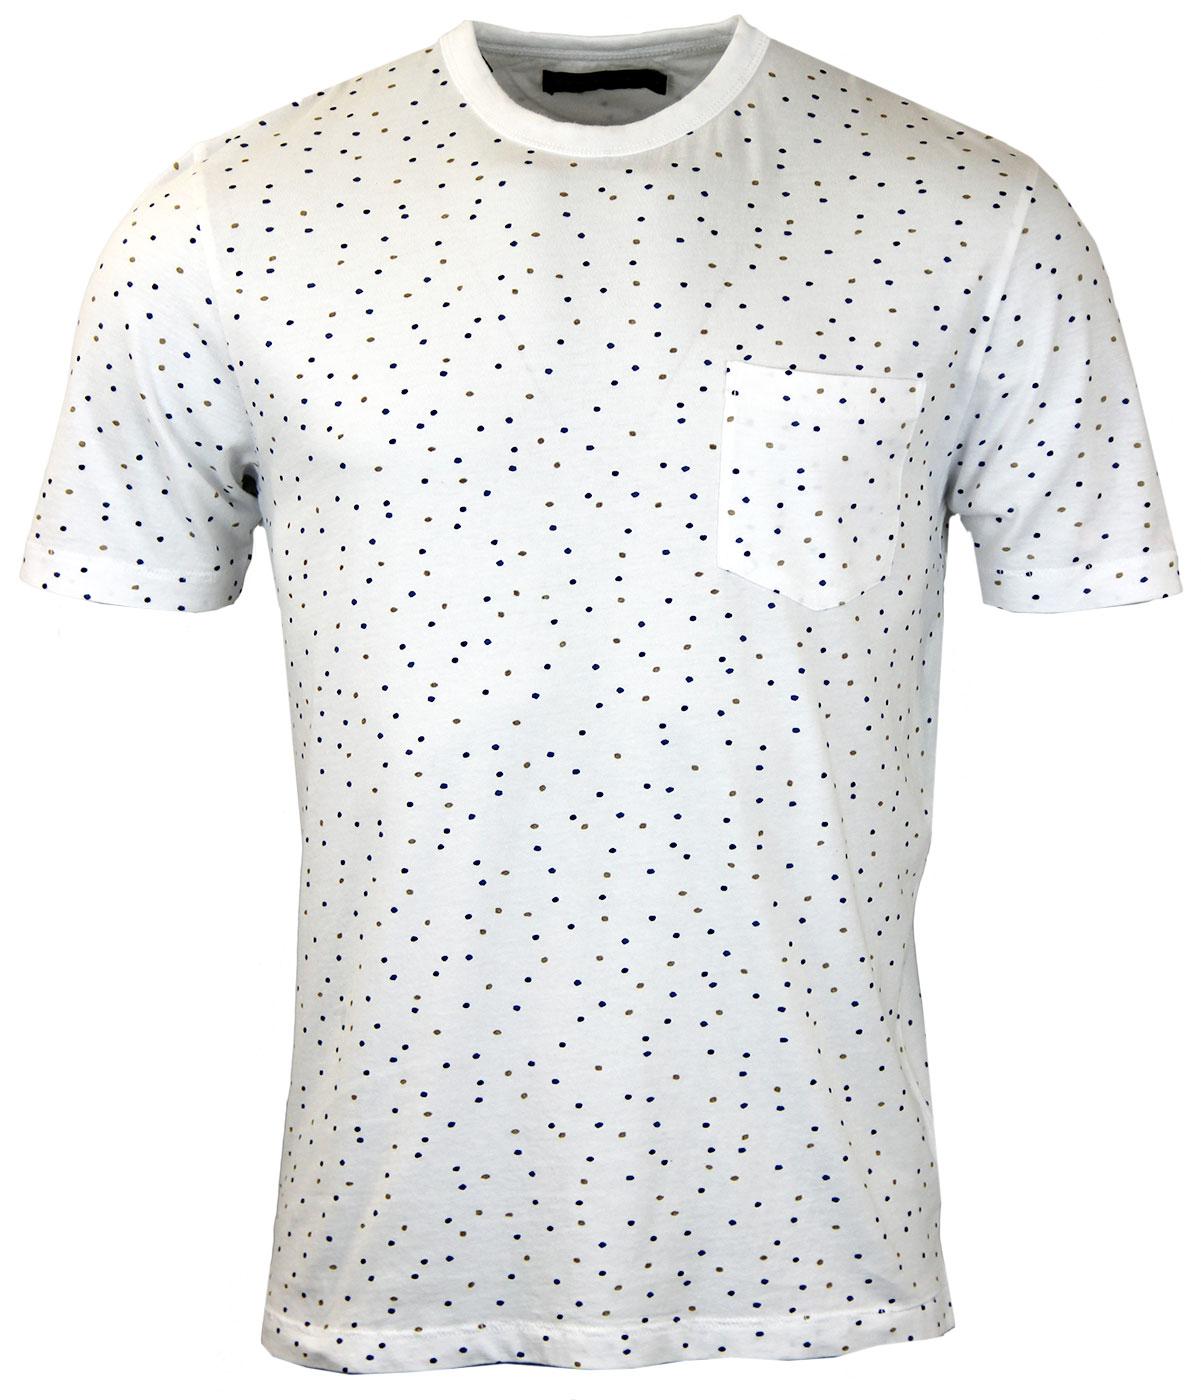 FRENCH CONNECTION Coolibah Retro Mod Polka Dot T-Shirt in White